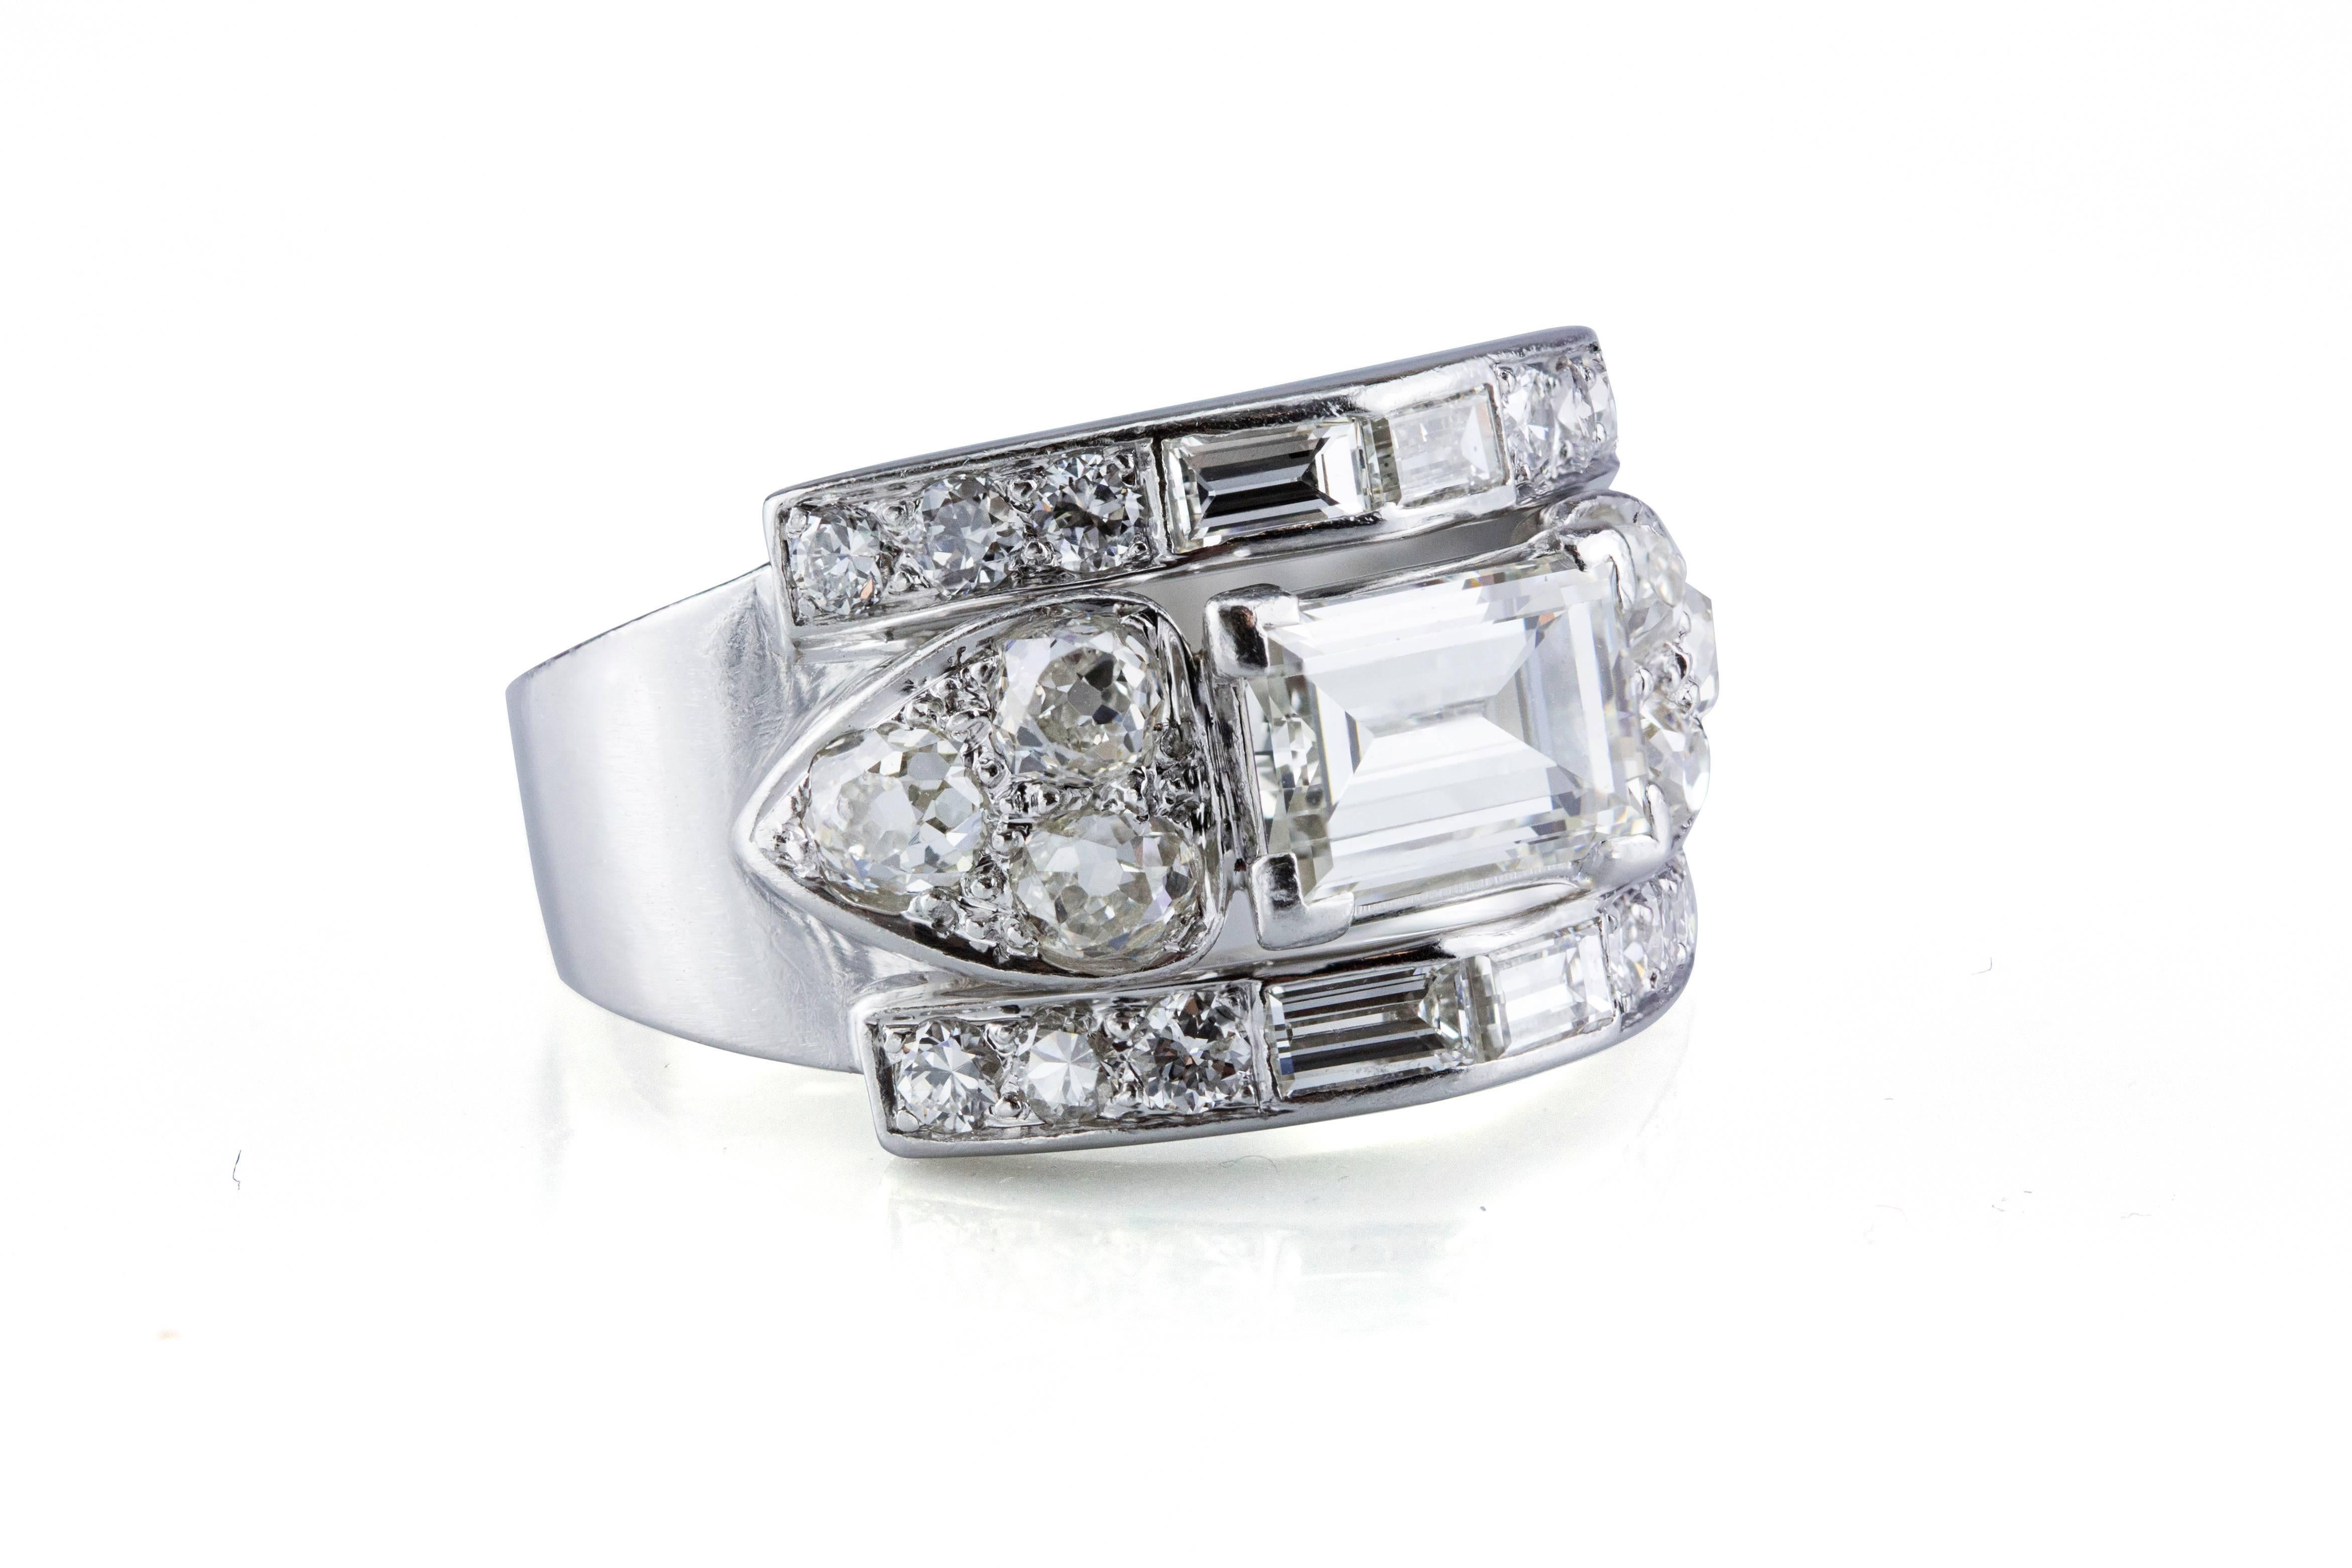 This ring features one 1.15 carat emerald-cut diamond in the center accented by  2 baguette diamonds on the top and bottom and by 3 Old Mine diamonds on either side. The weight of baguette cut diamonds is 0.40 carat, the weight of Old Mine cut